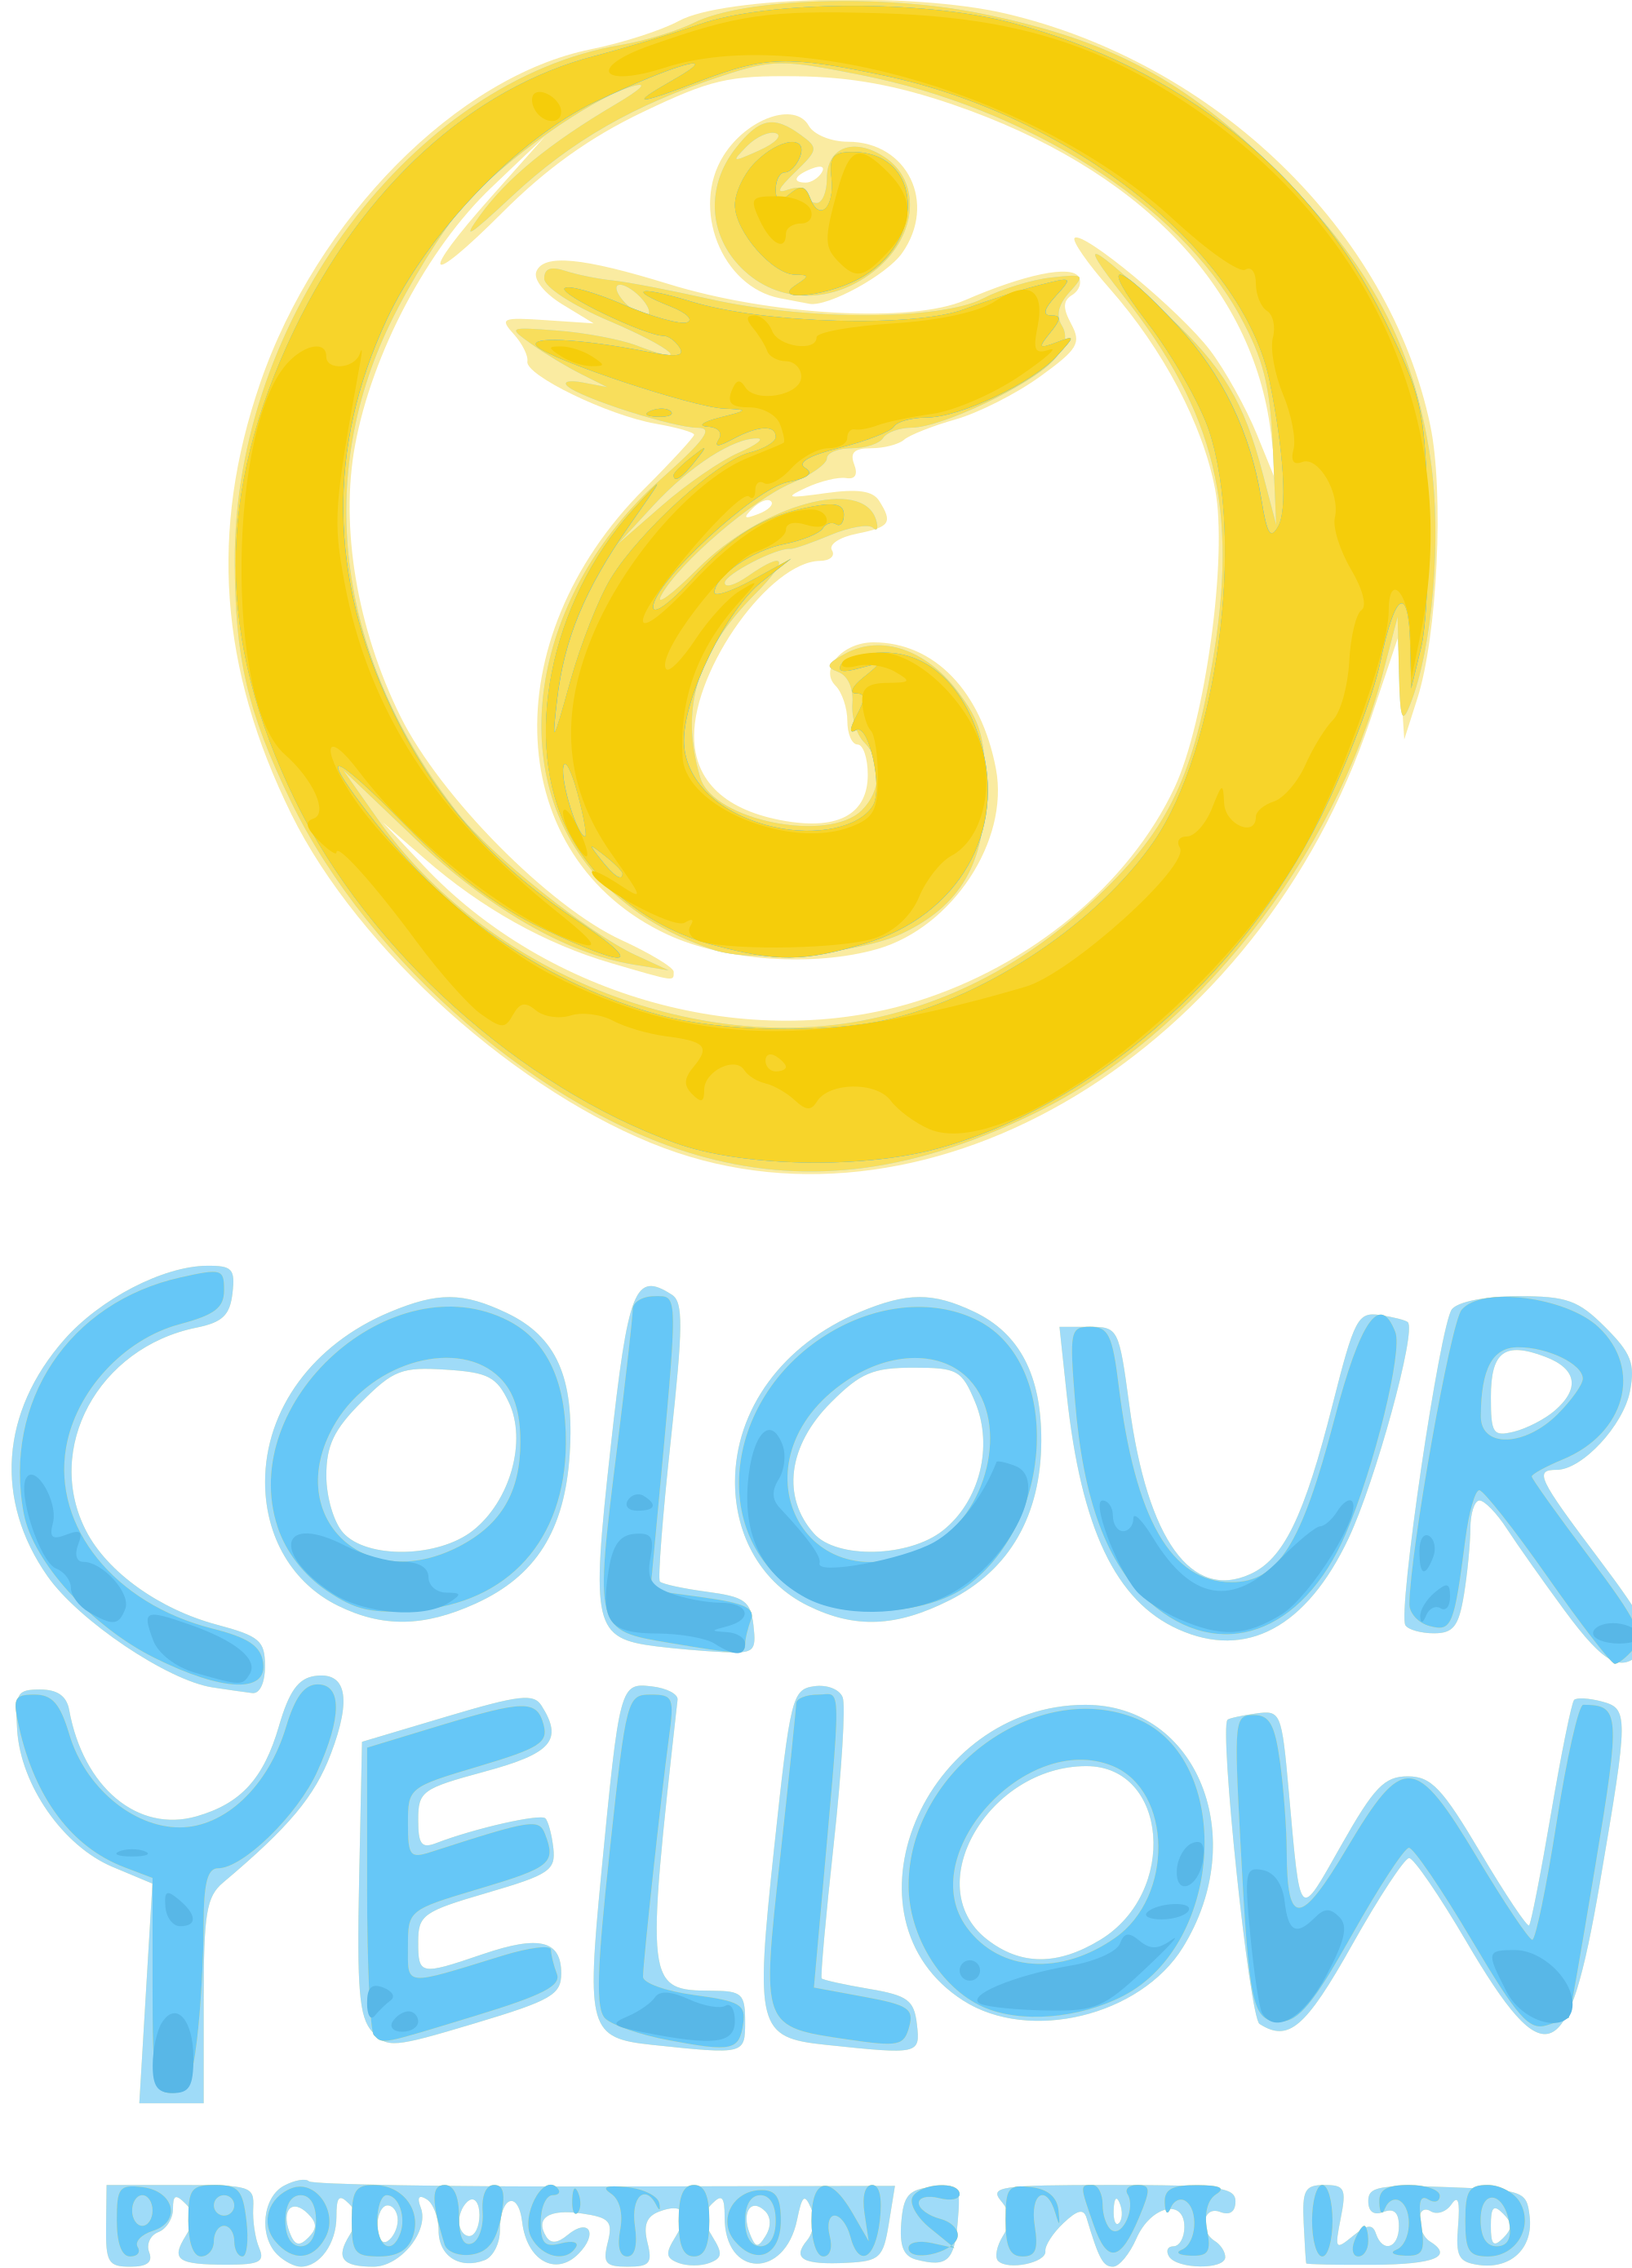 Colour Yellow Productions